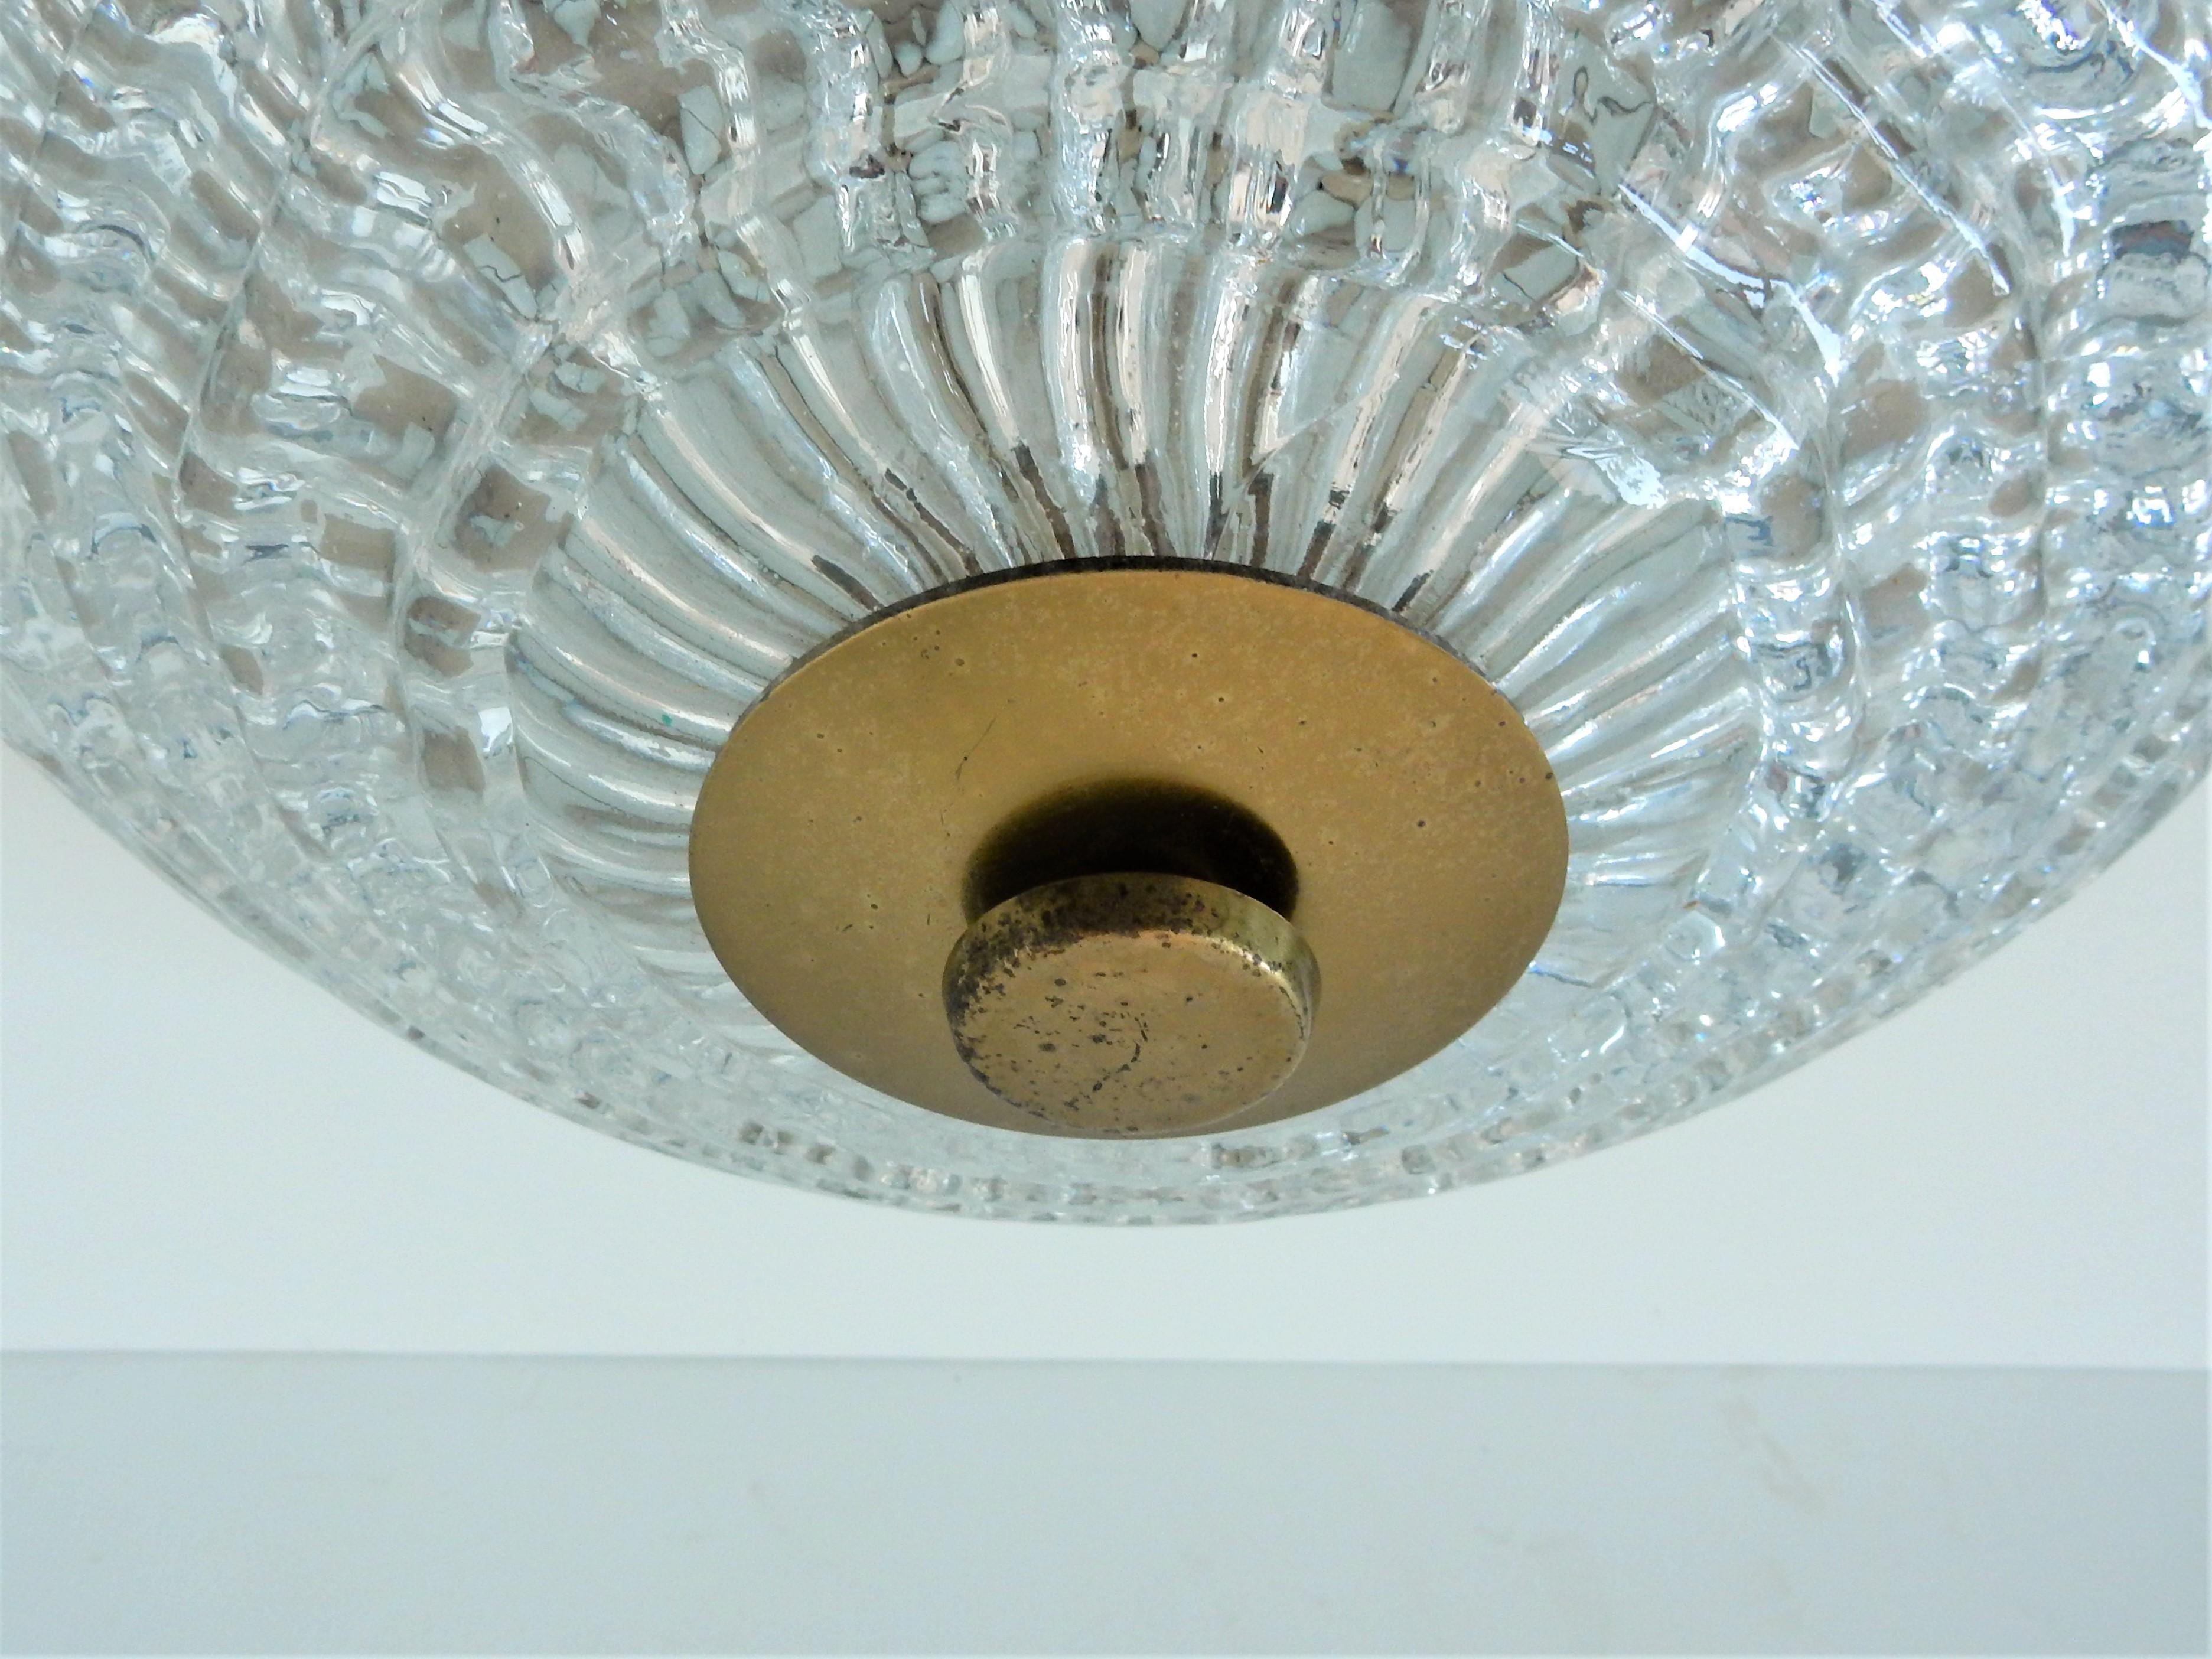 Swedish Crystal and Brass Ceiling Lamp by Carl Fagerlund for Orrefors and Lyfa, Sweden